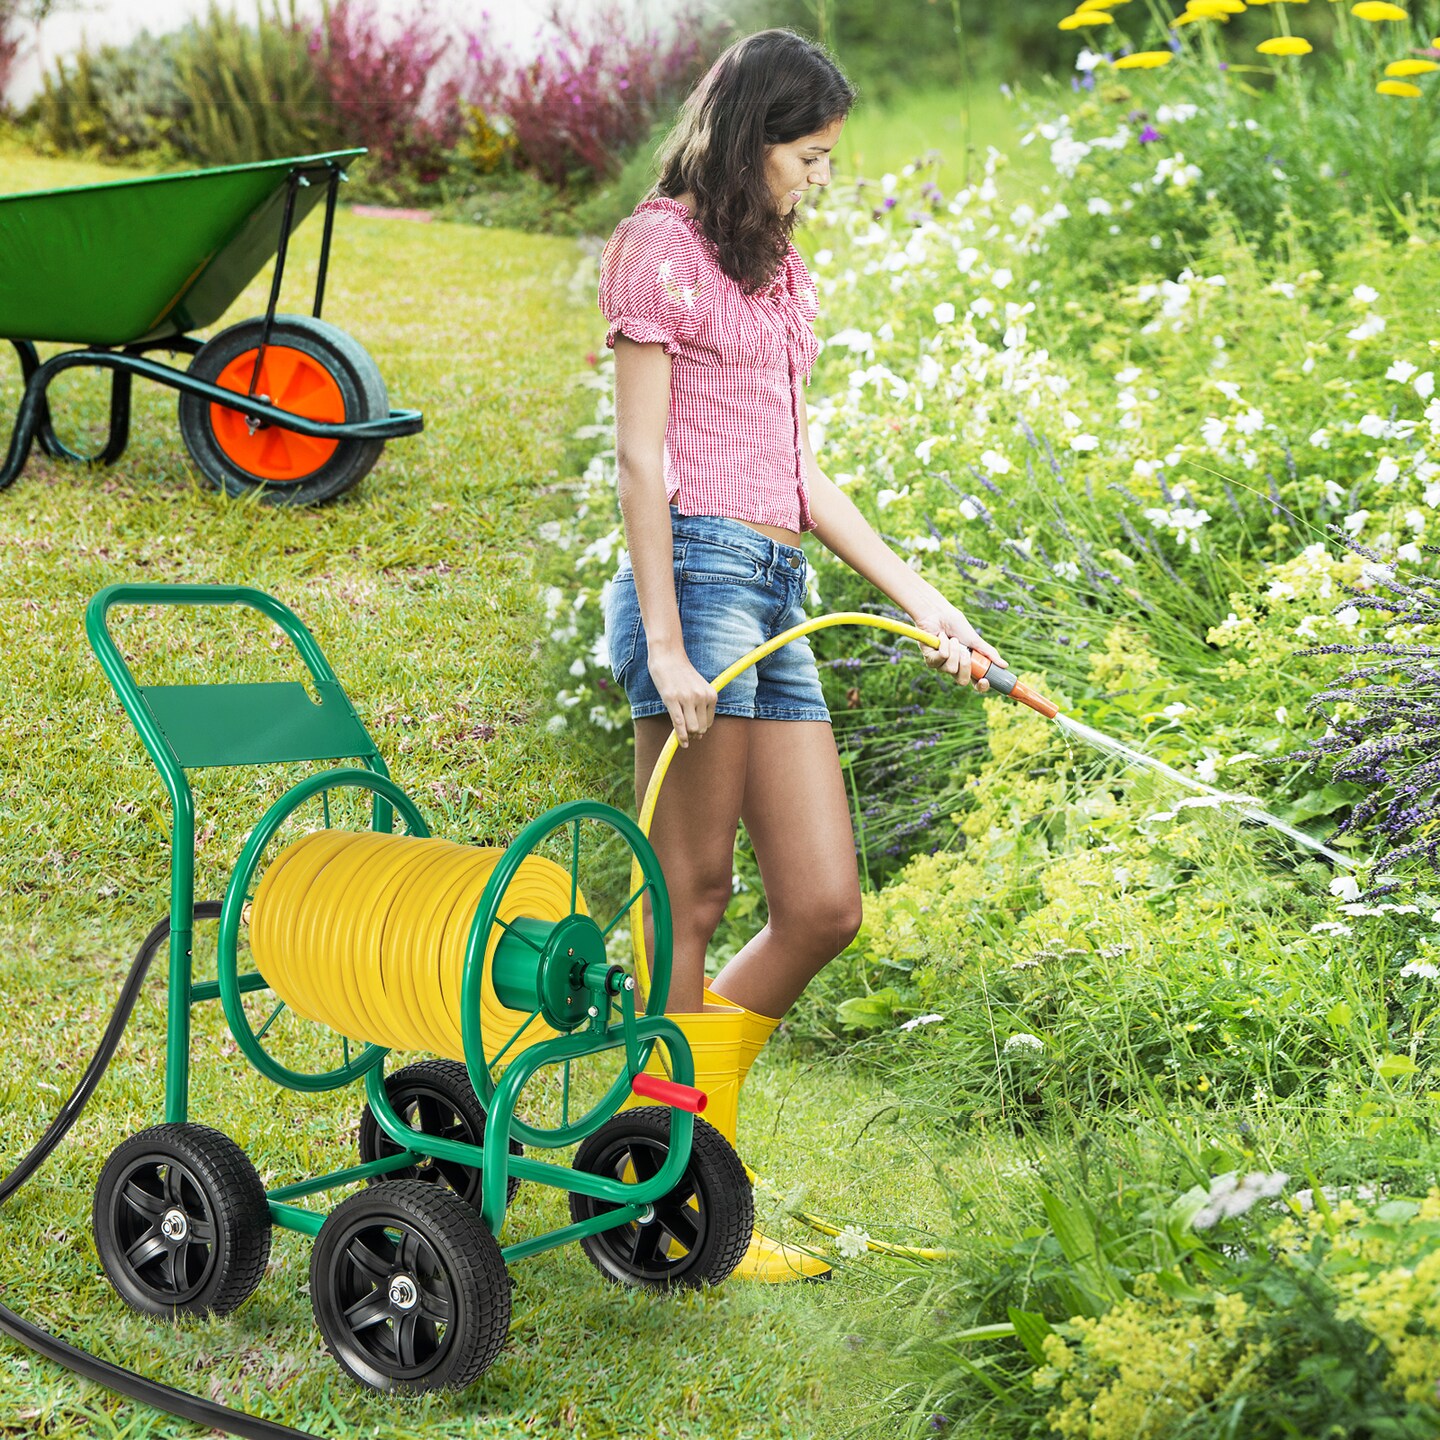 Garden Hose Reel Cart Holds 330ft of 3/4 Inch or 5/8 Inch Hose - 35&#x22; x 23.5&#x22; x 36.5&#x22;